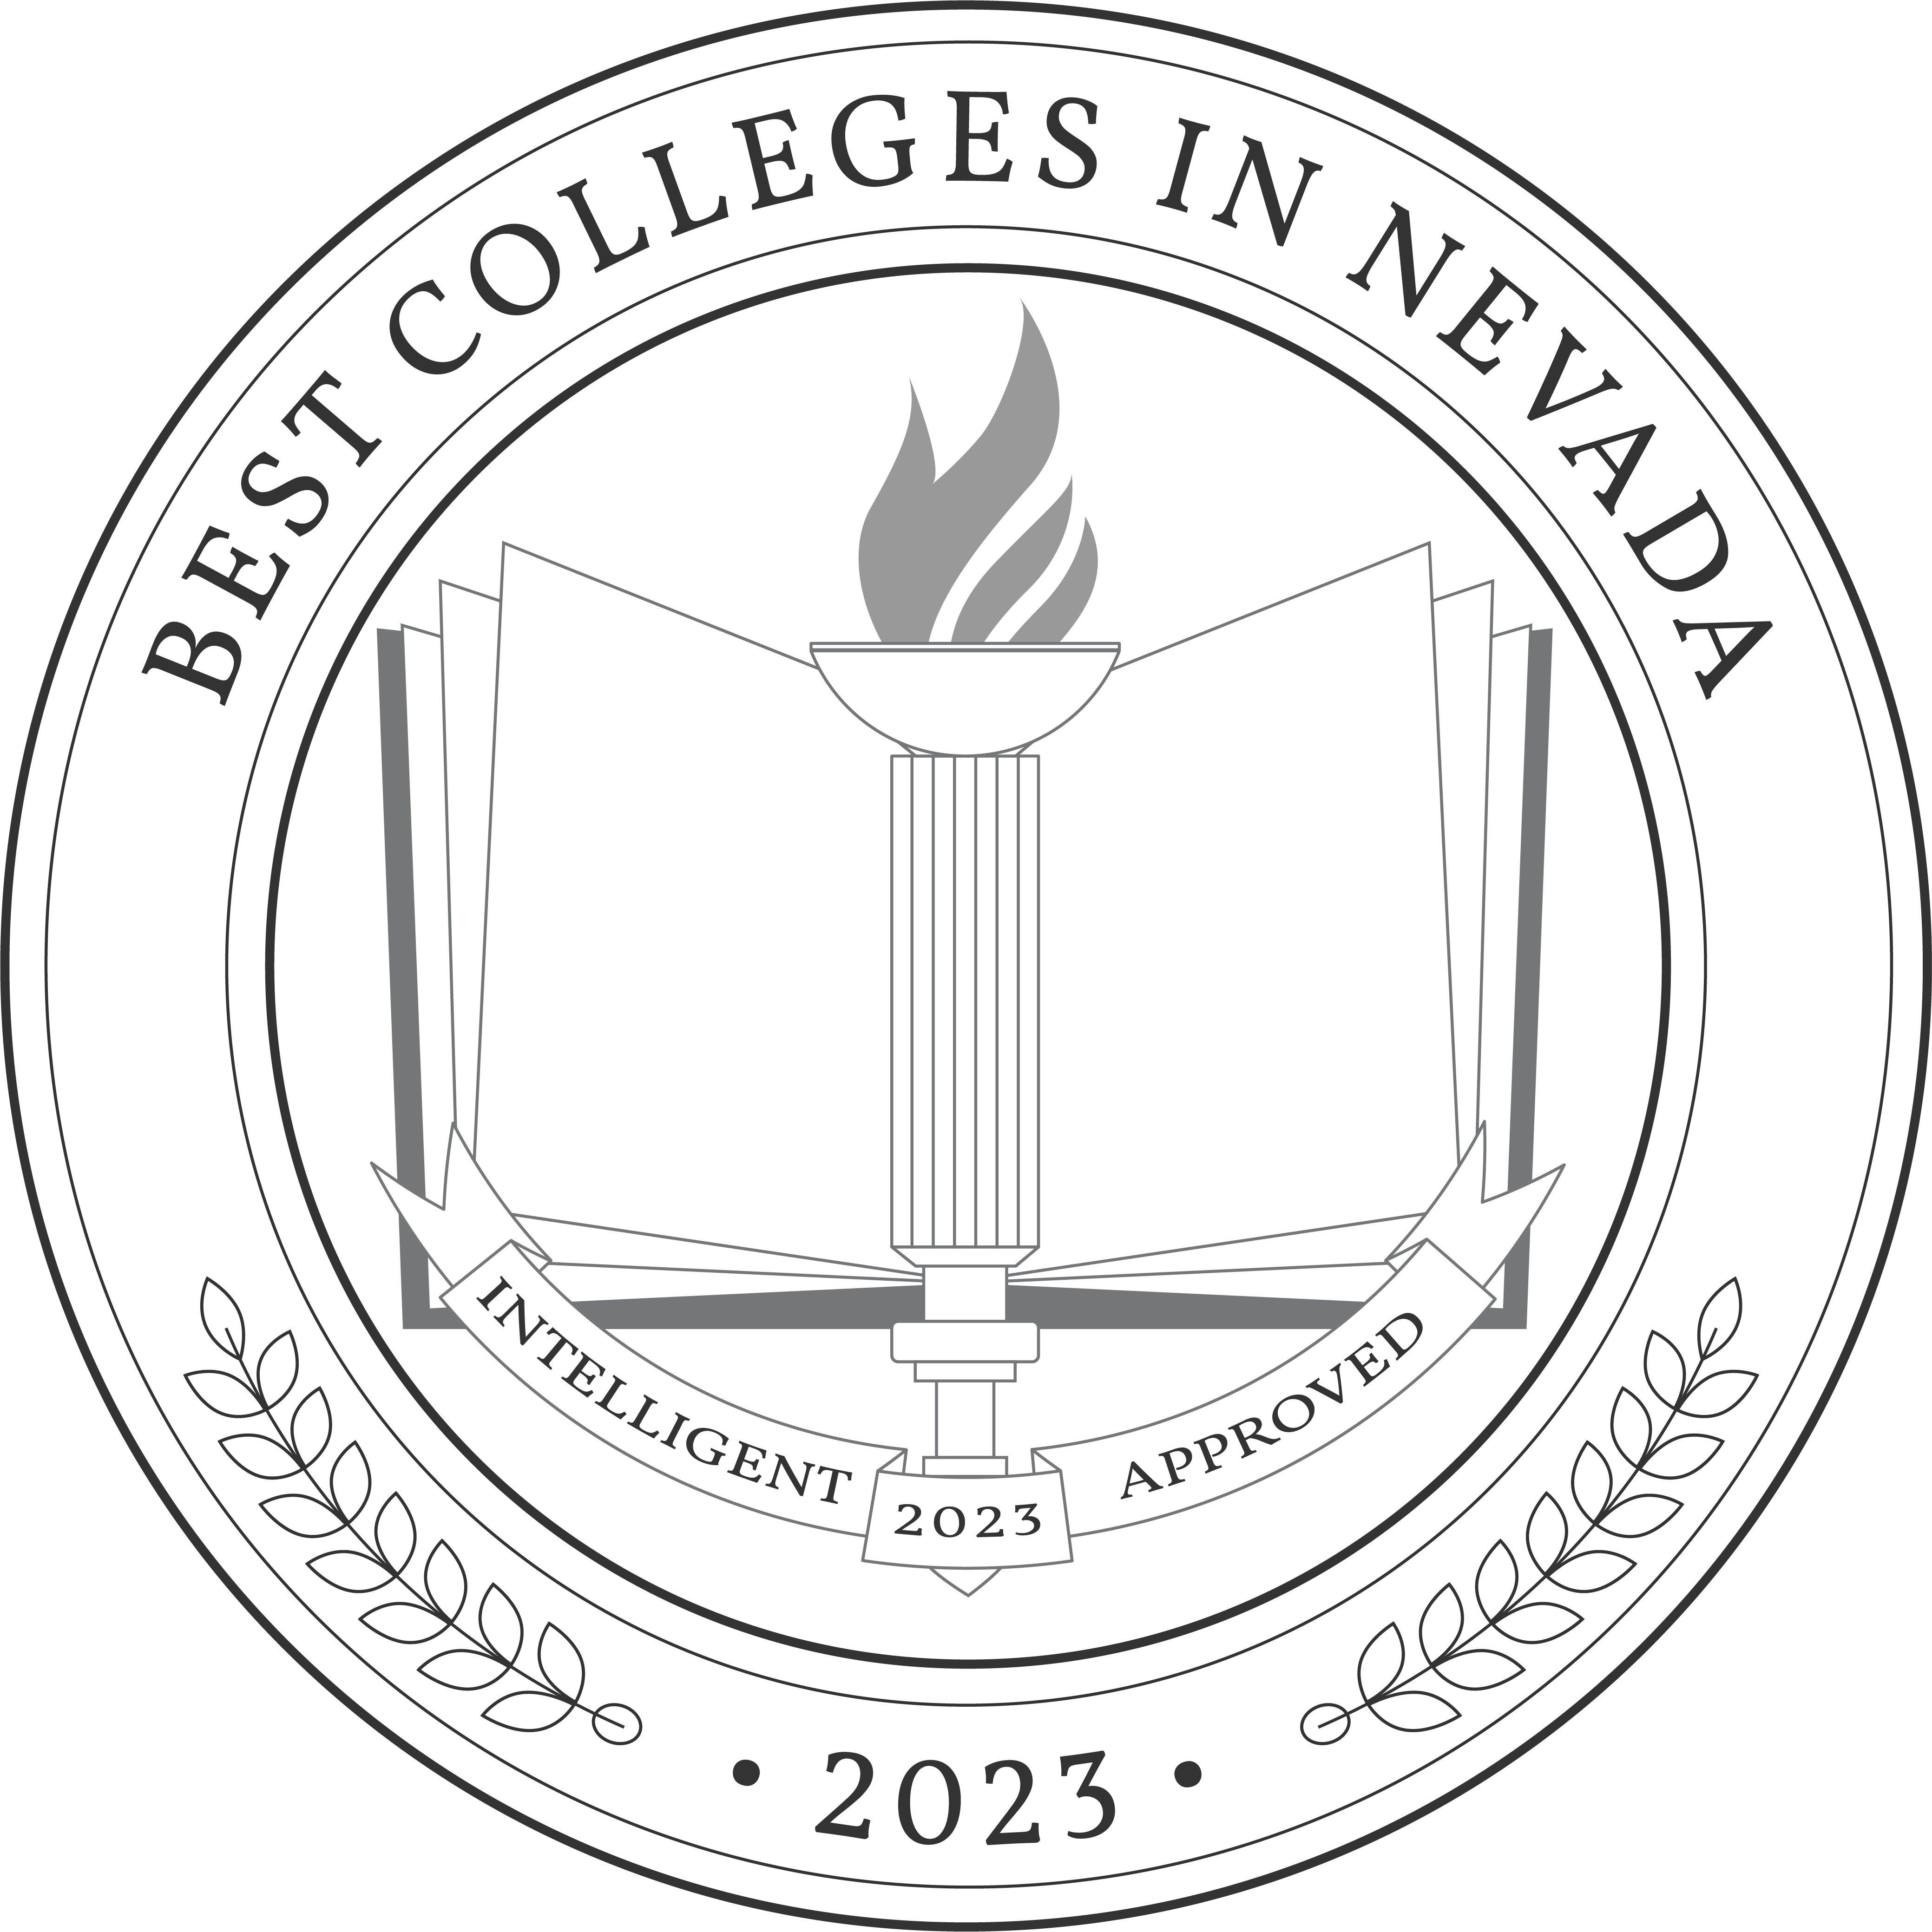 Best Colleges In Nevada